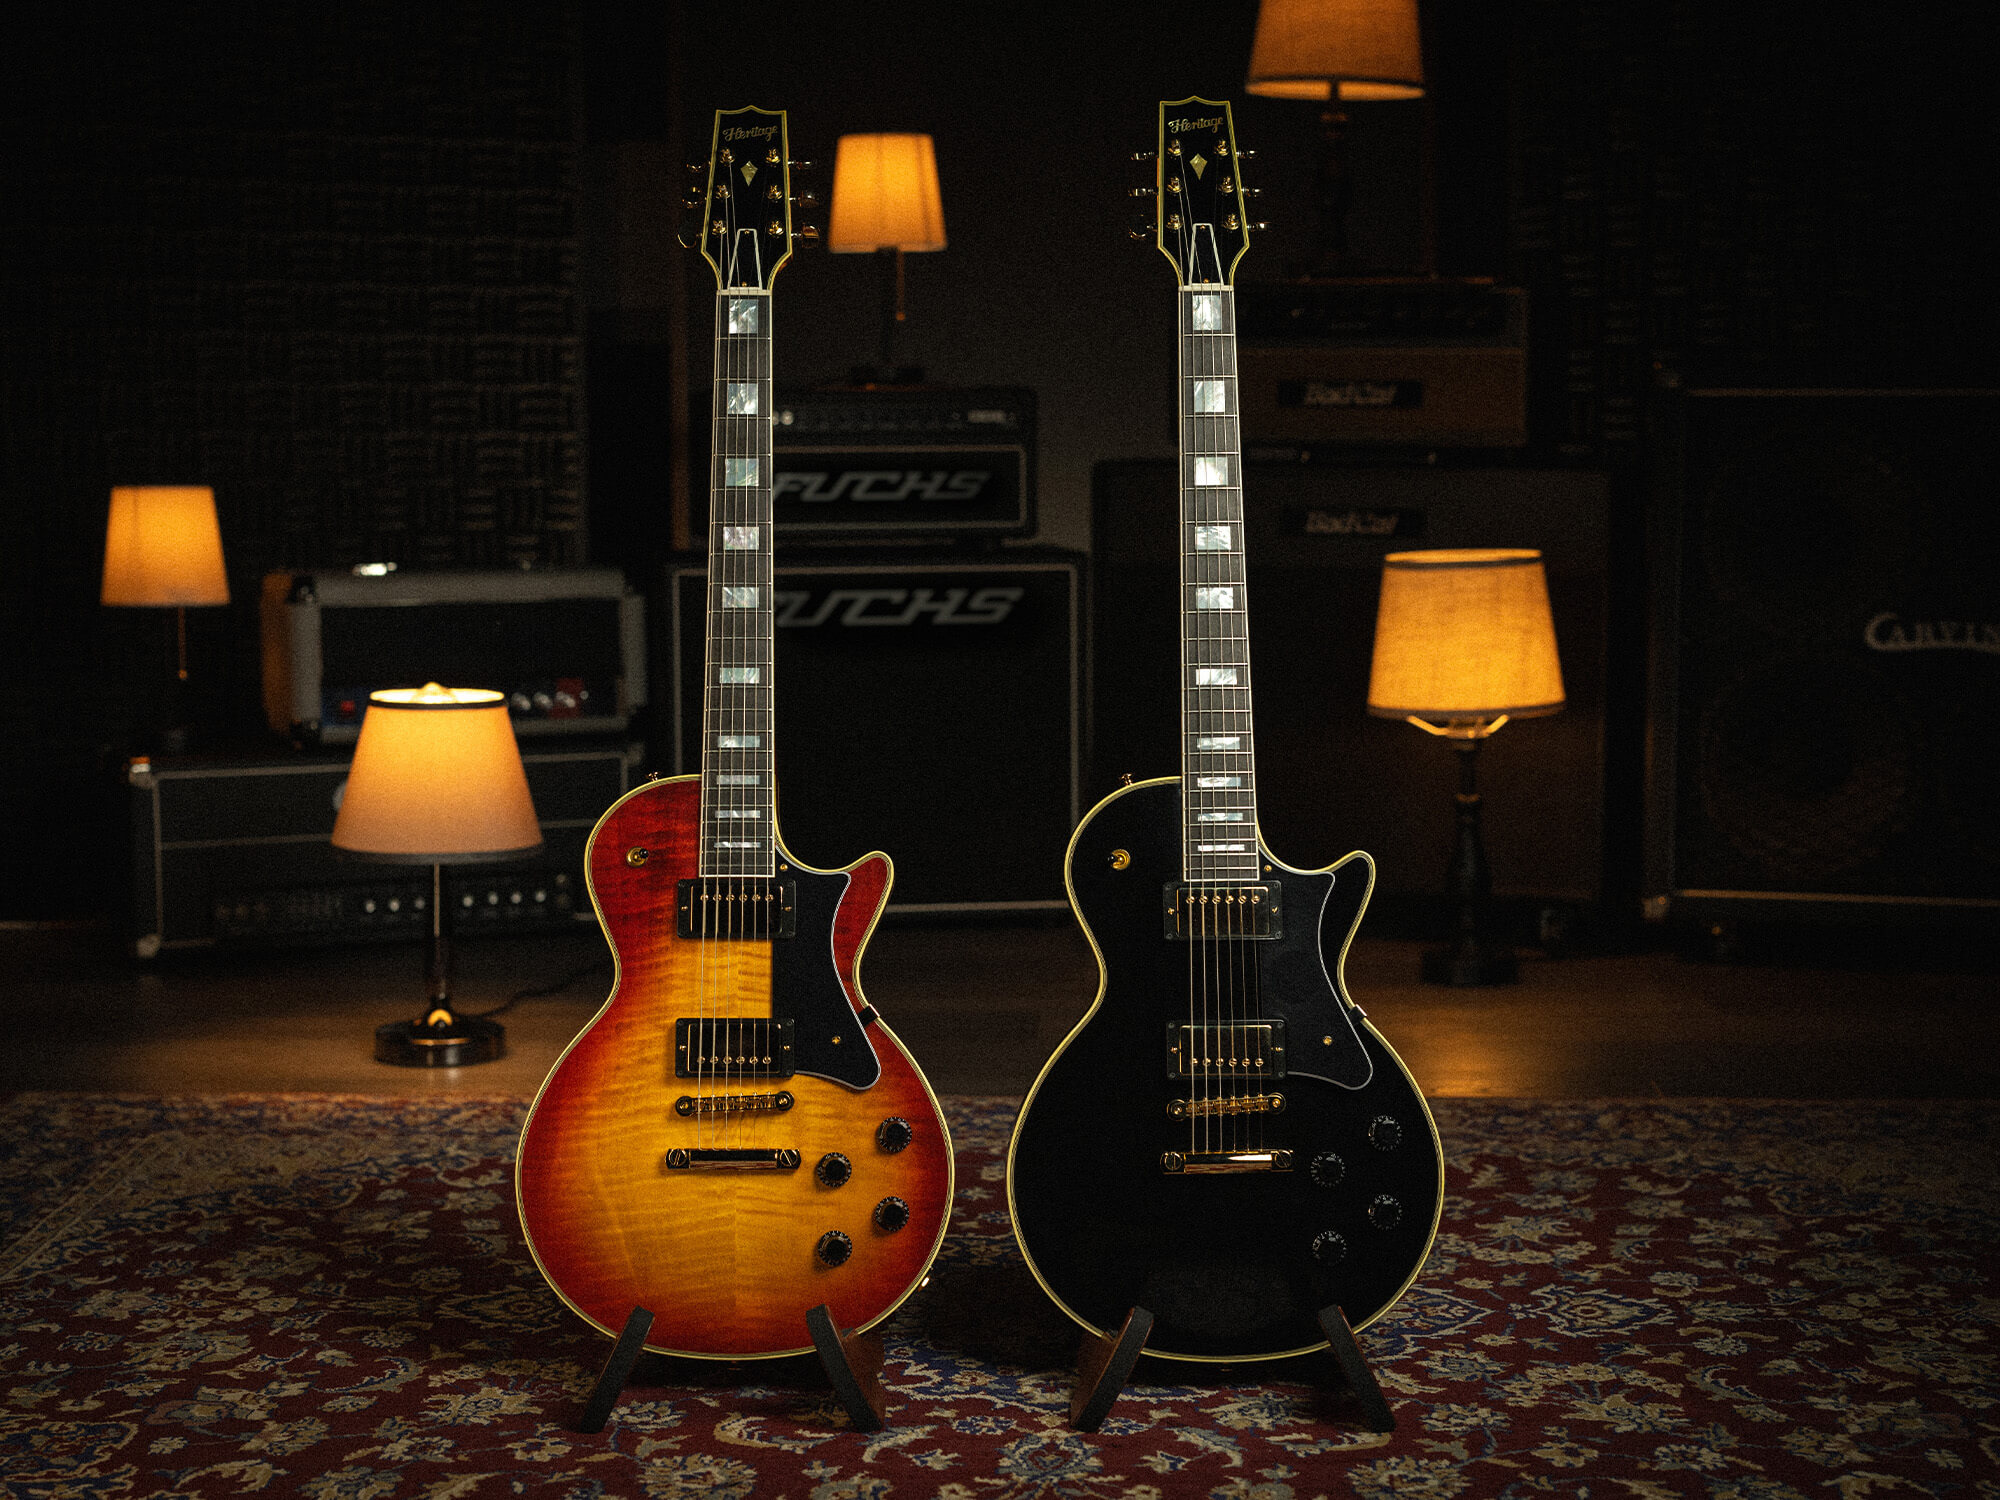 Heritage H-157 models together. The 'burst (left) has a woody, orange into red colour on the body. The ebony (right) has a sleek black look.